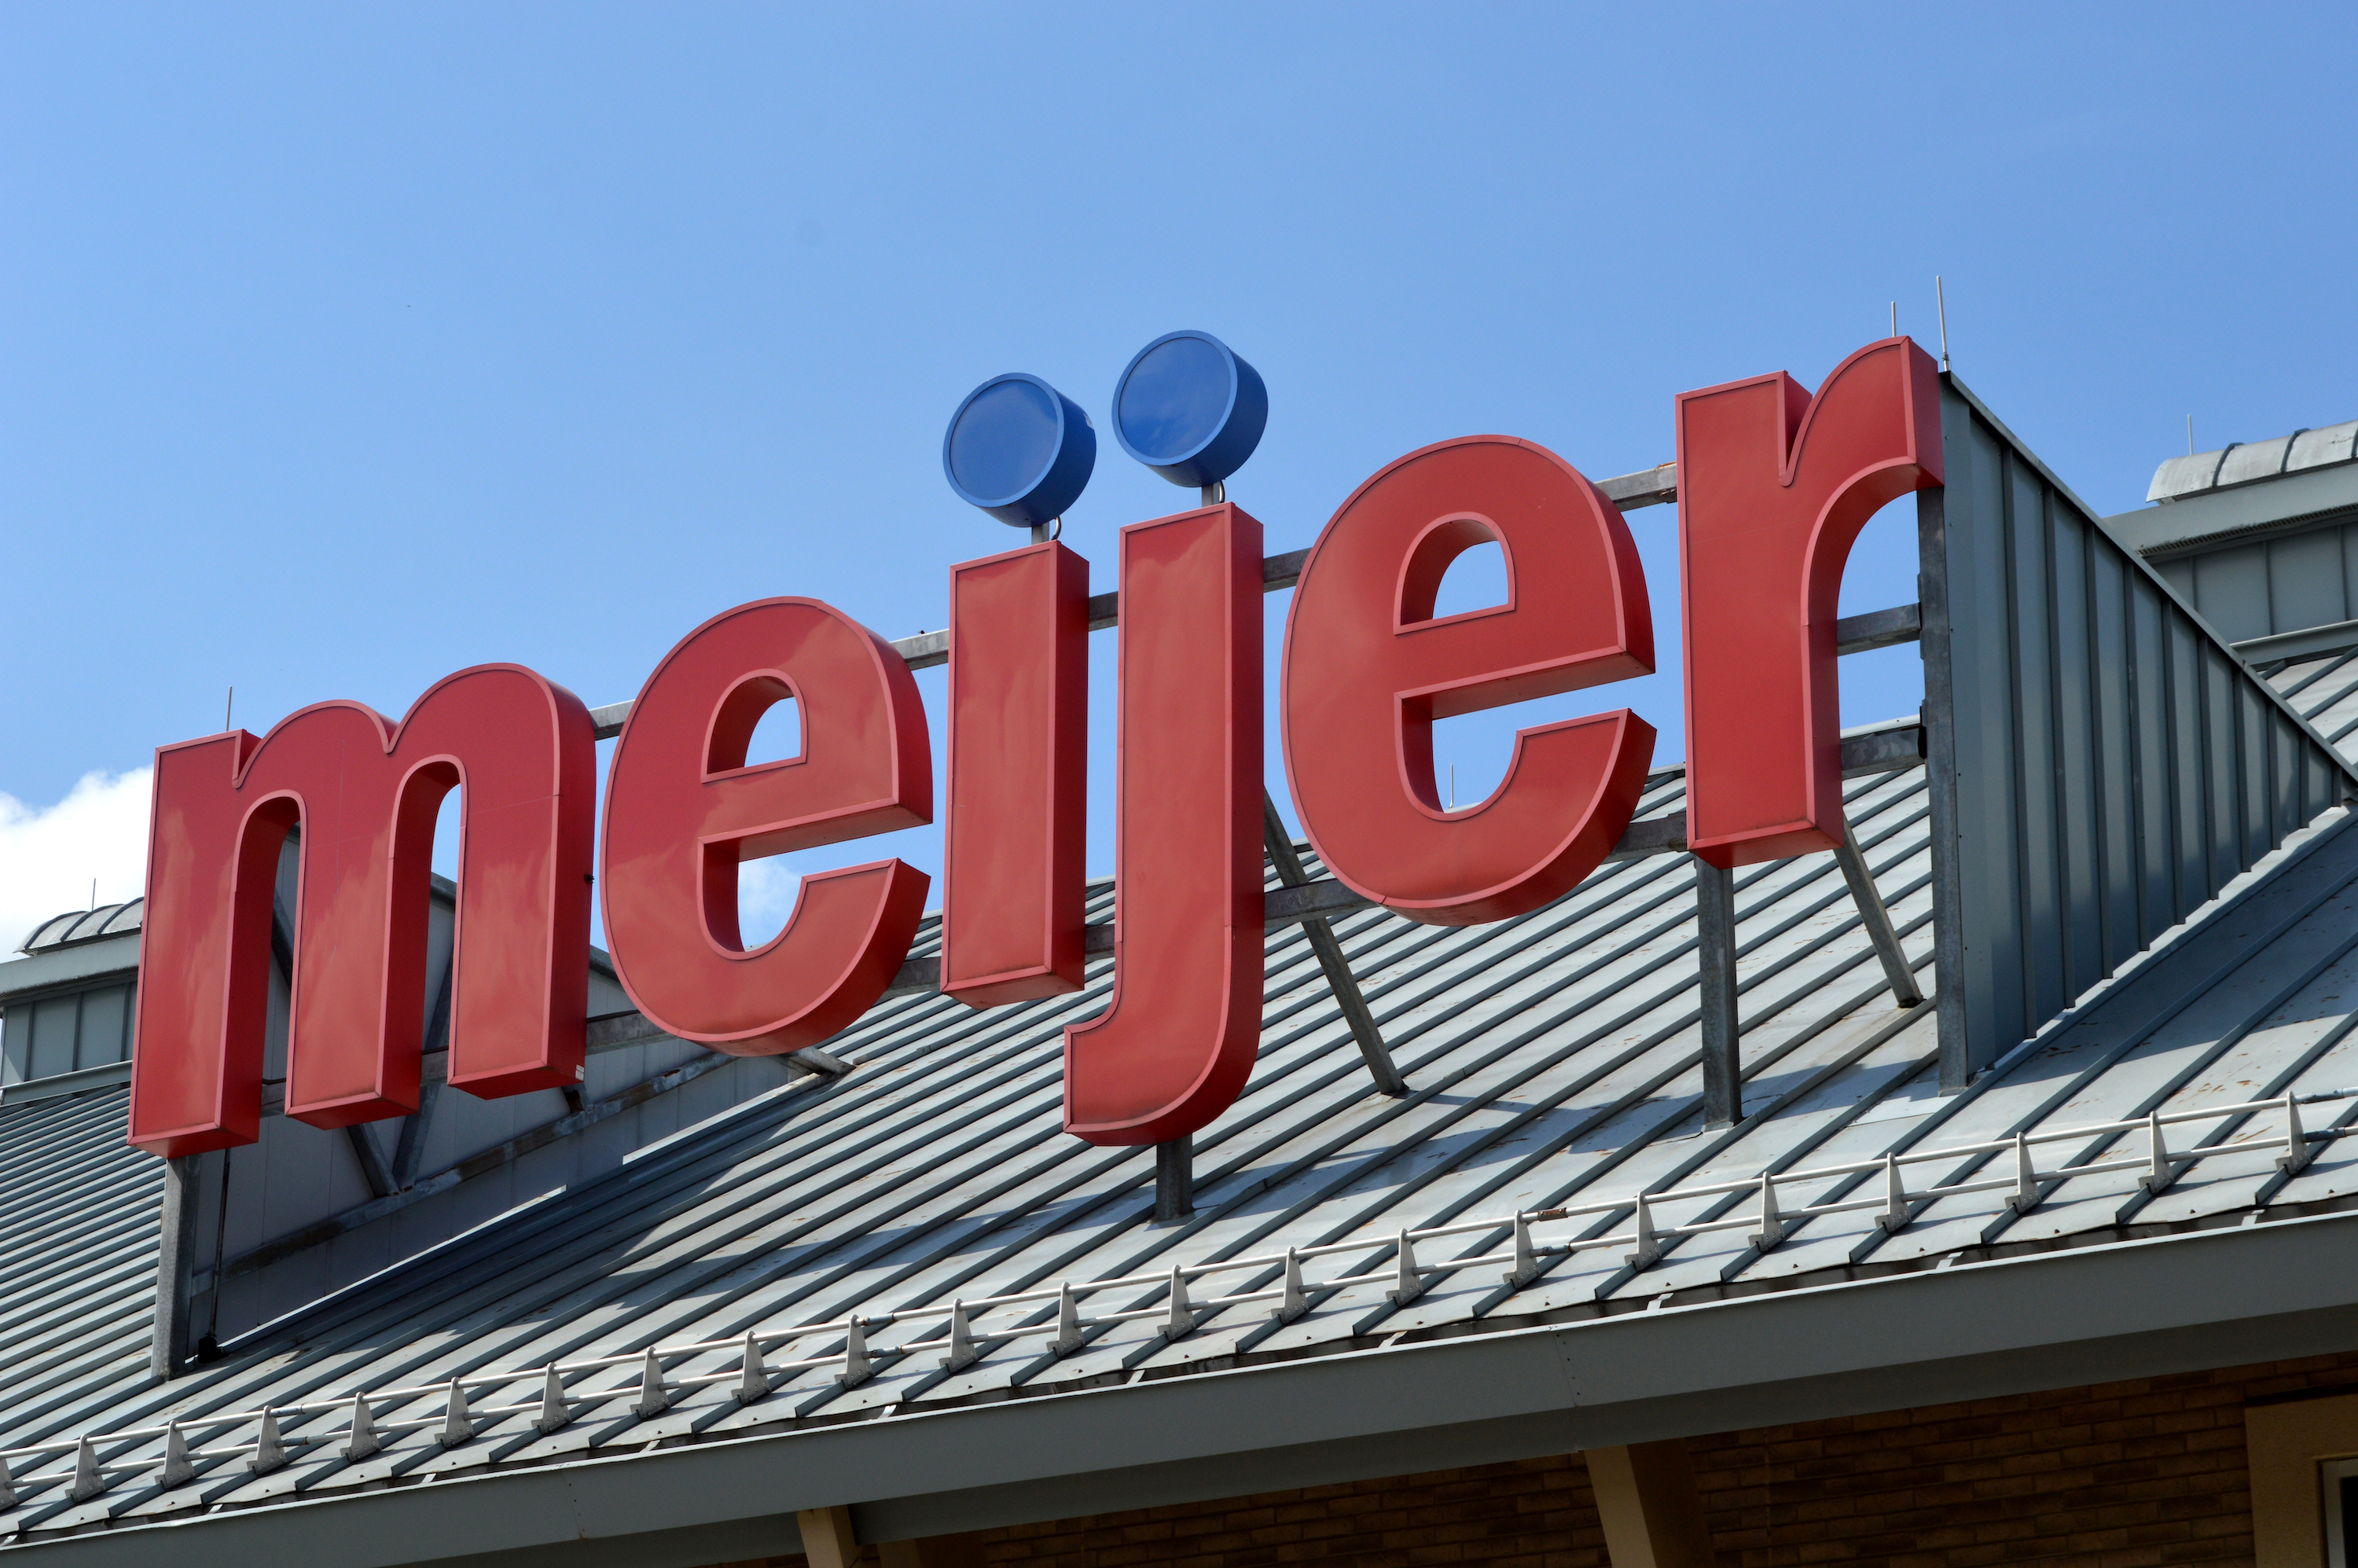 A closeup of a large, red “Meijer” sign.